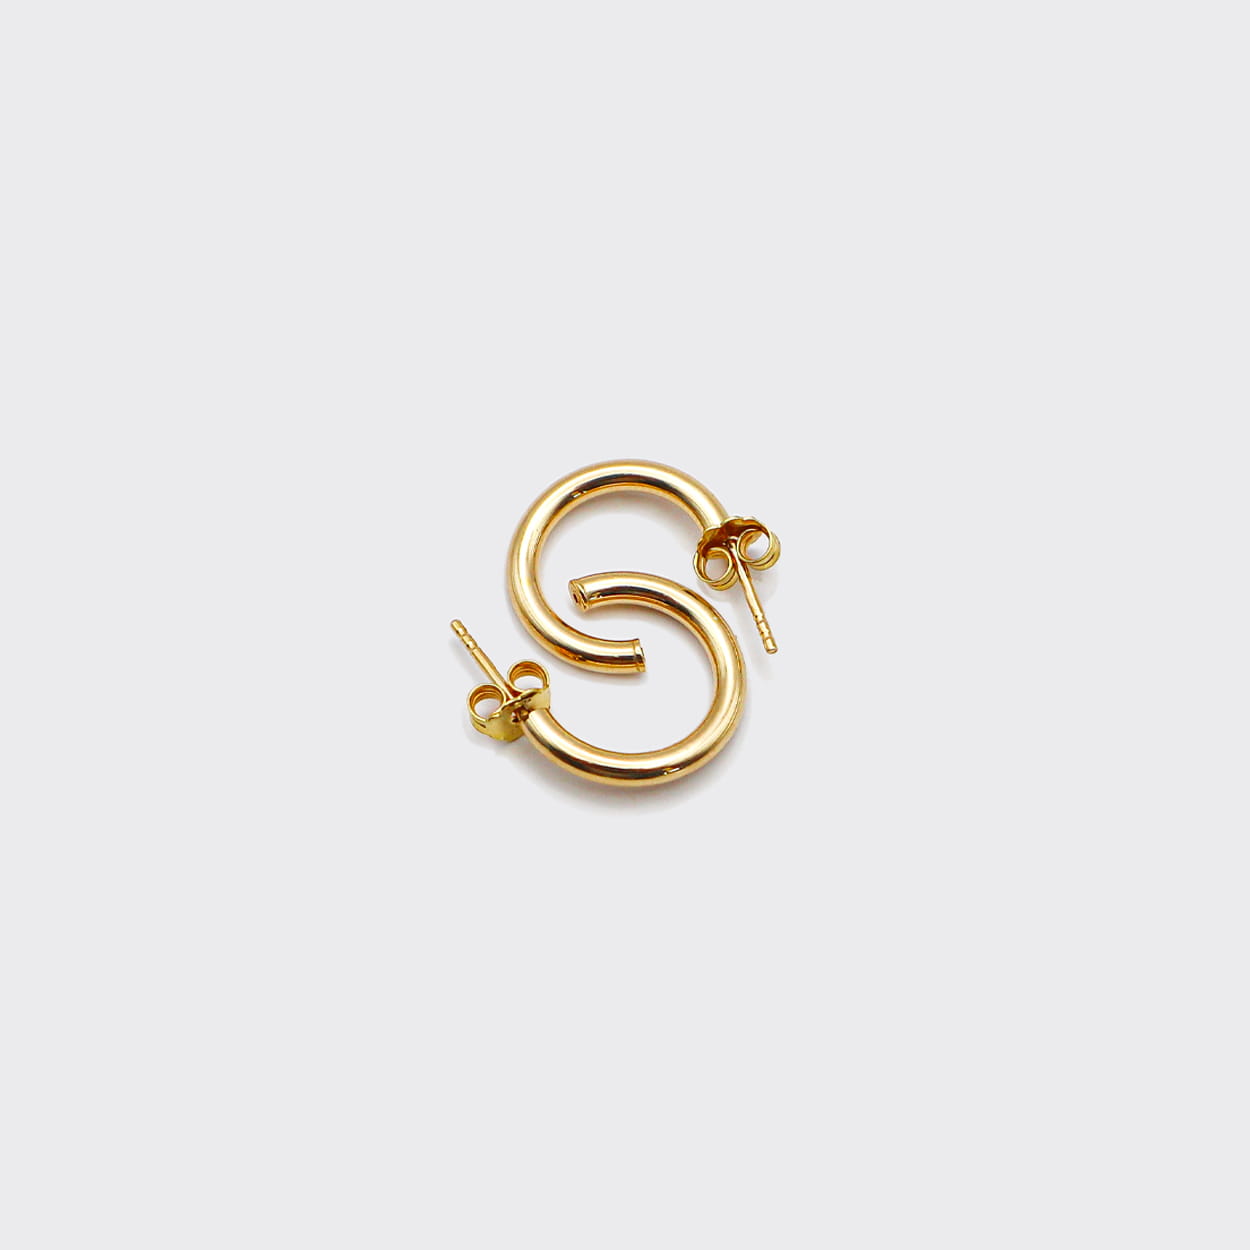 The Hoop 23 is a unisex, timeless and elegant earring designed by Atelier Domingo's. It is crafted in Italy and made of solid 925 Sterling silver with a high-quality 18 karat gold plating. It is a tribute to the famous number 23 of the Chicago Bulls. It is made to be worn every day, by men and women.